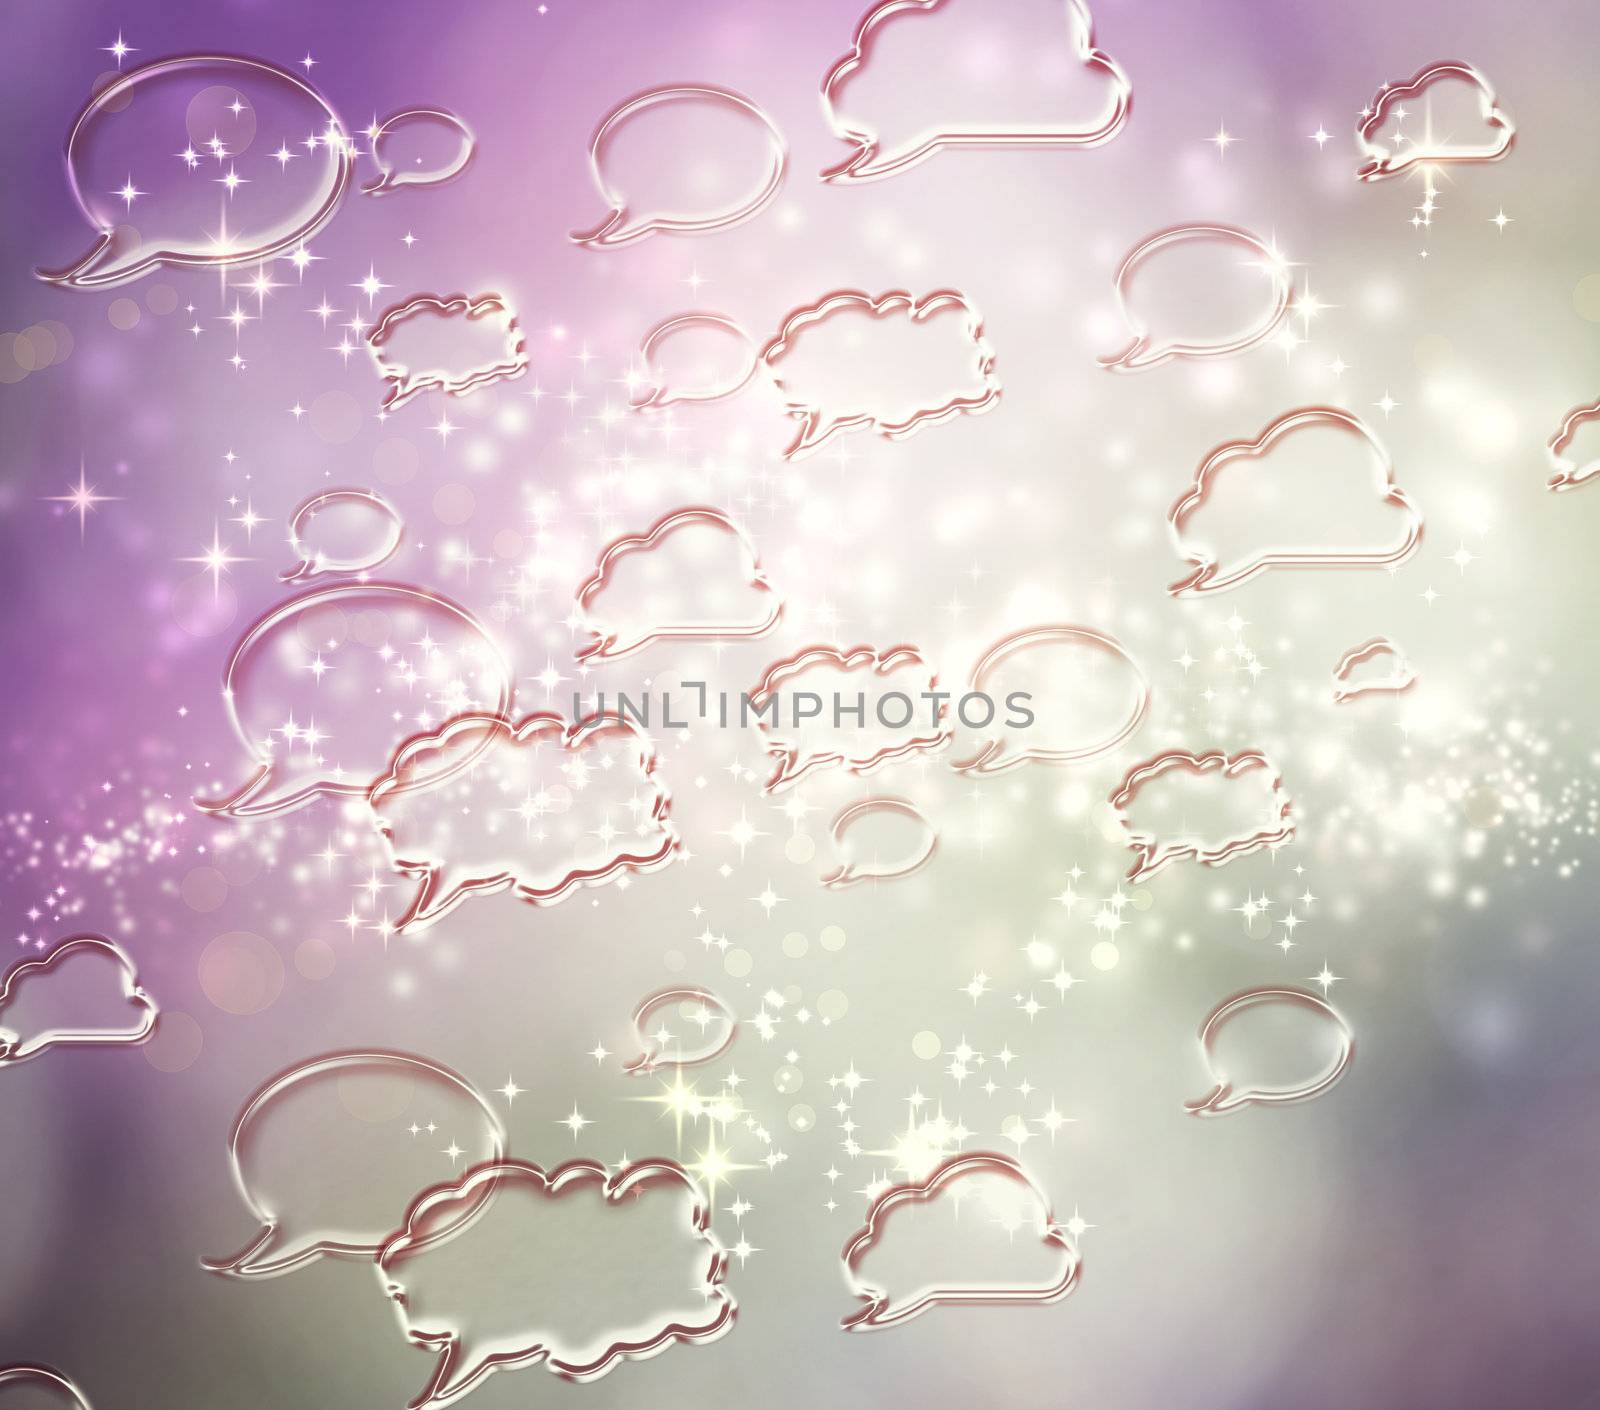 Speech Bubbles on Purple Abstract Lights Background